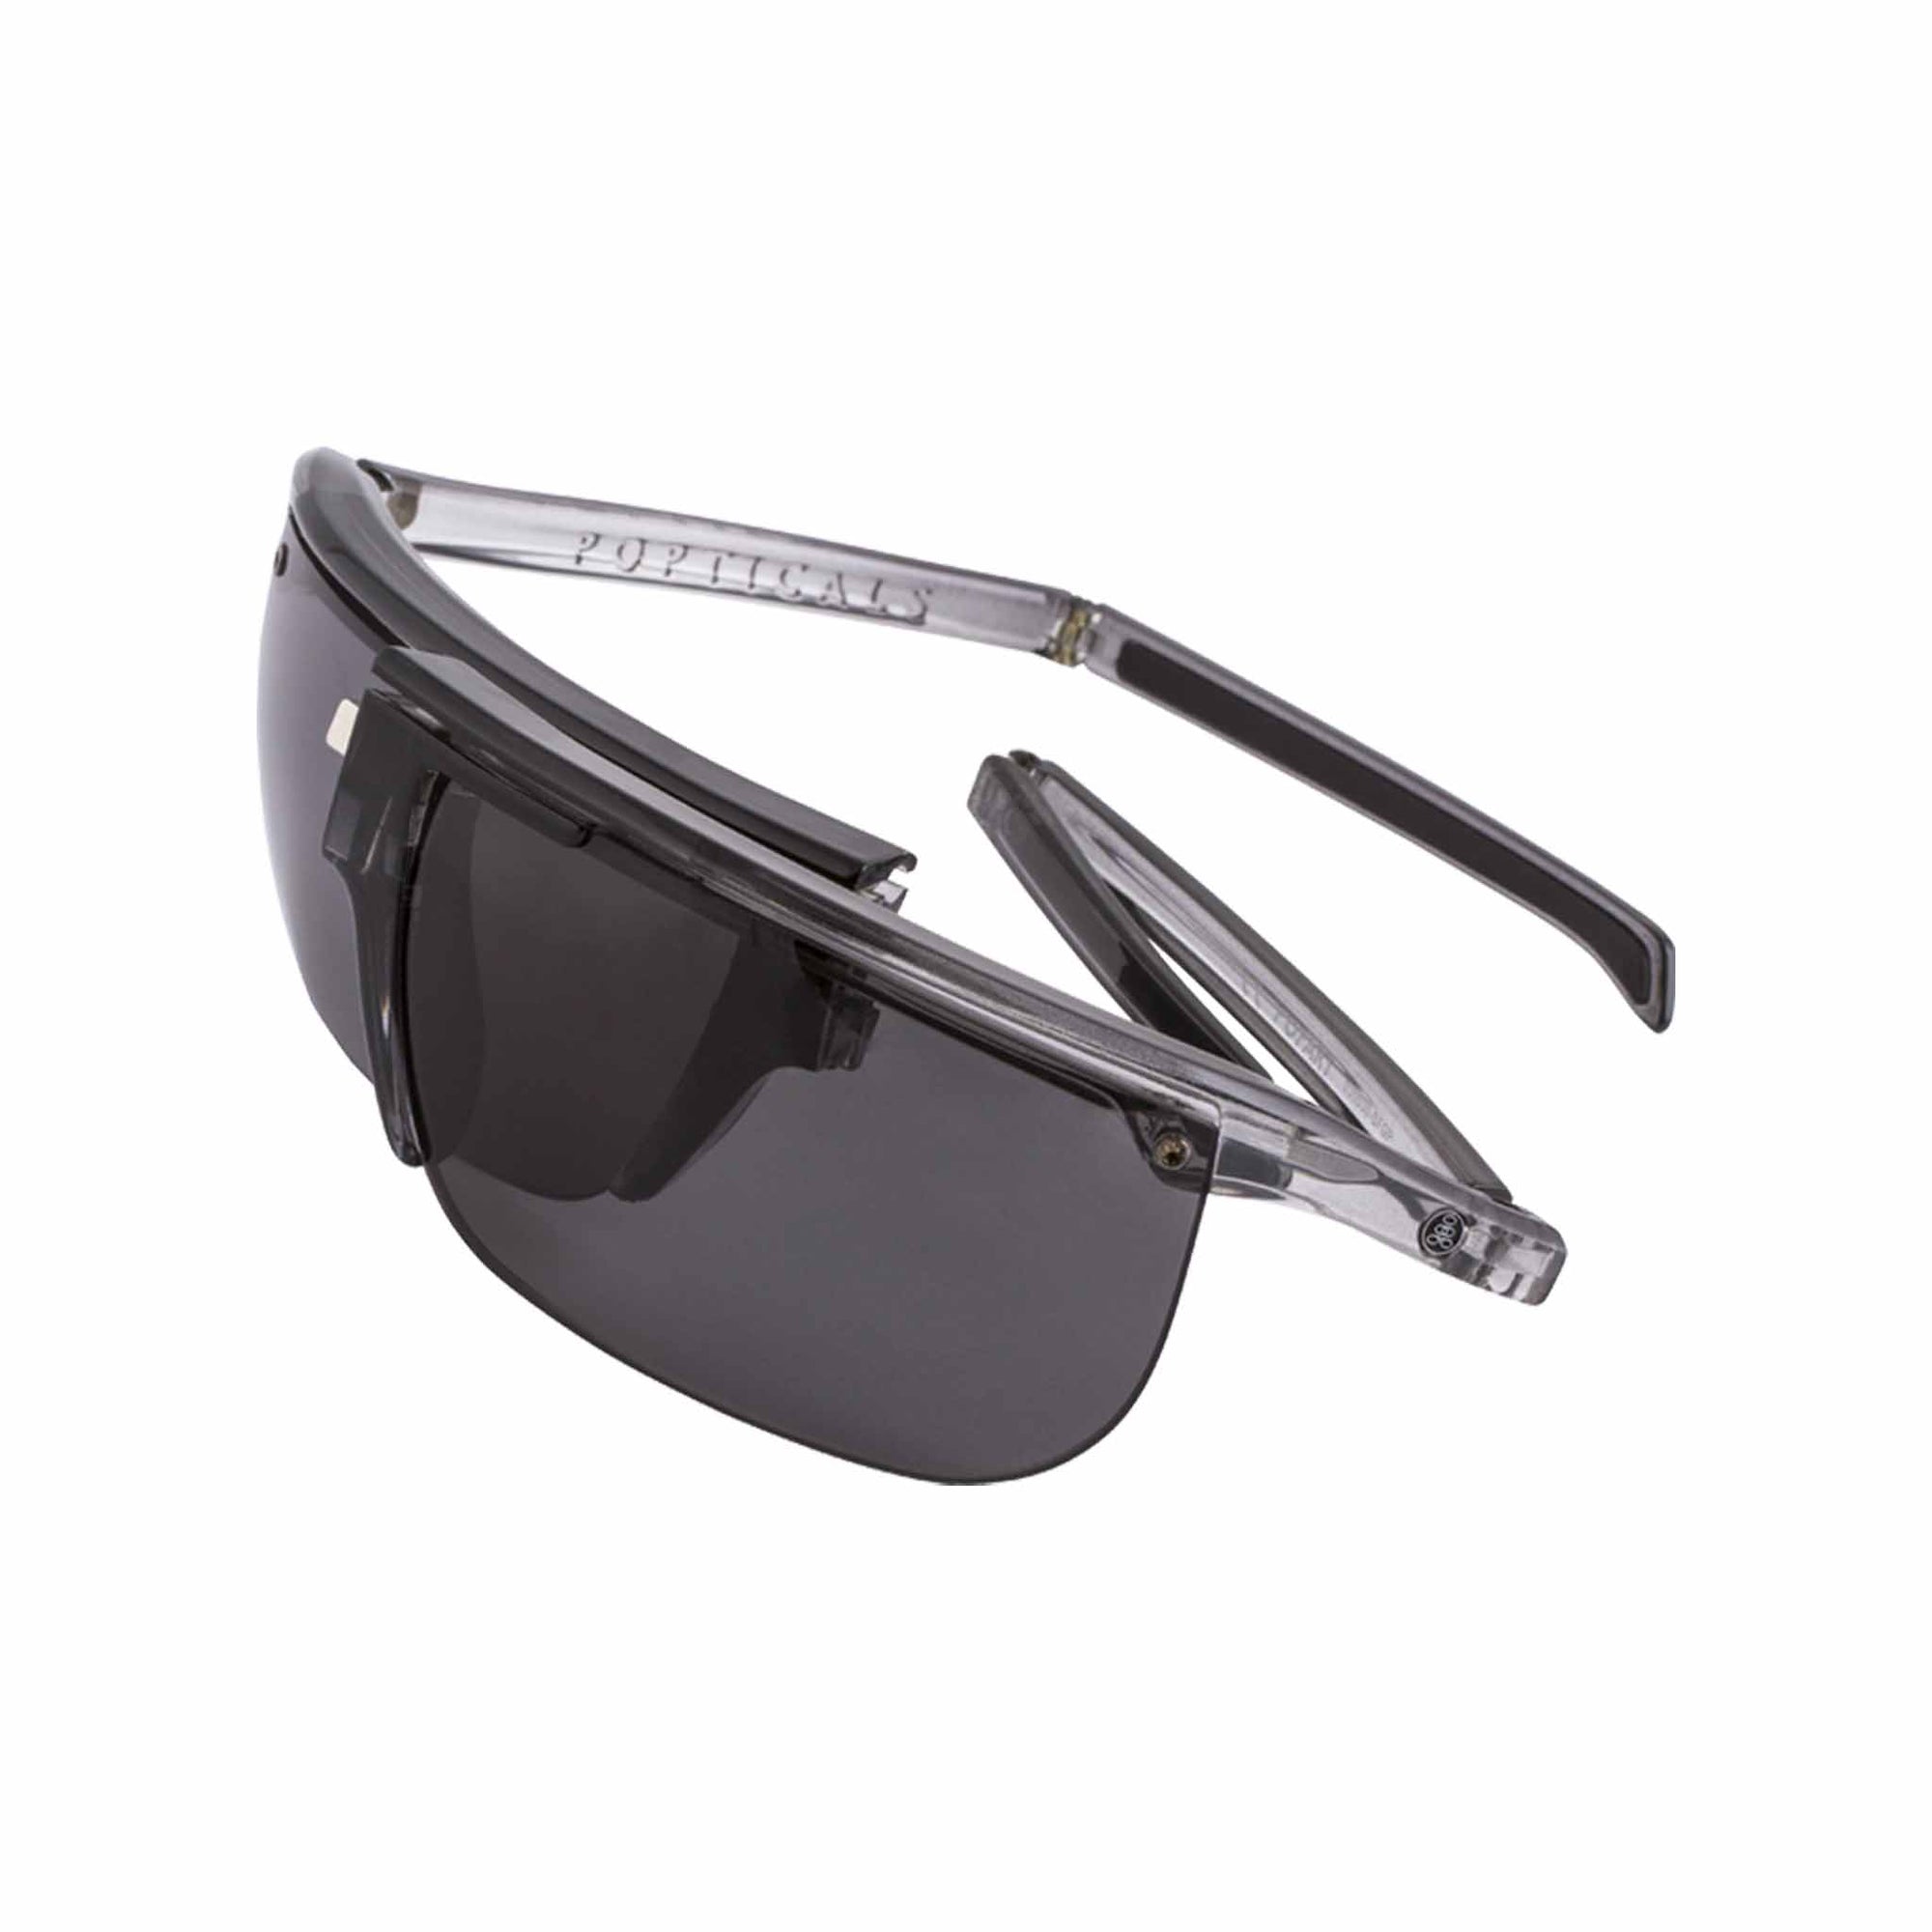 Popticals, Premium Compact Sunglasses, PopArt, 030030-SFGP, Polarized Sunglasses, Gloss Smoke/Clear Crystal, Gray Lenses, Spider View